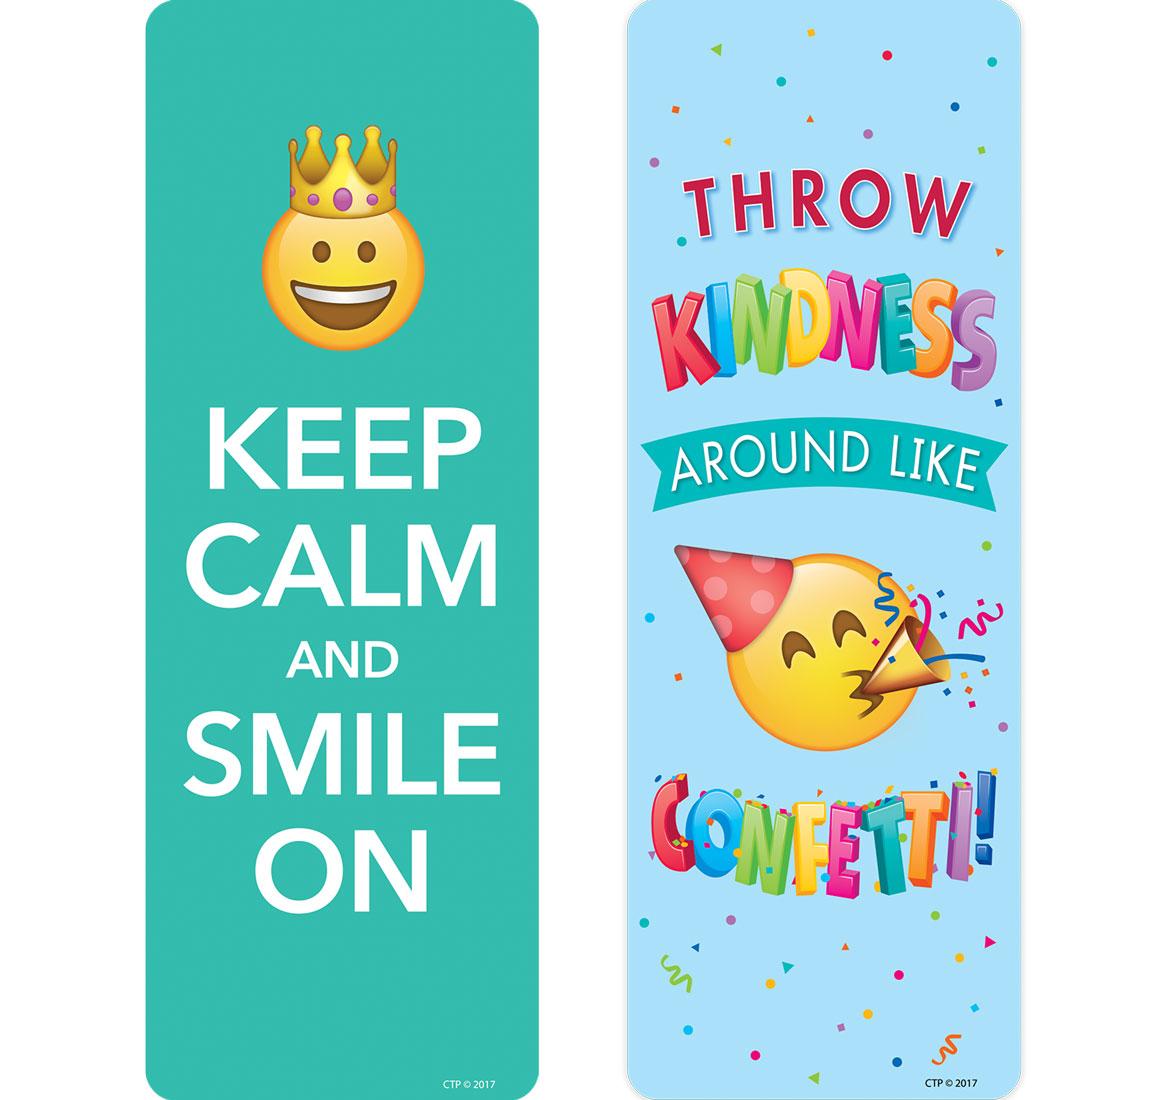 Emoji Fun Motivational Quotes Bookmarks include Keep Calm and Smile On and Throw Kindness Around Like Confetti